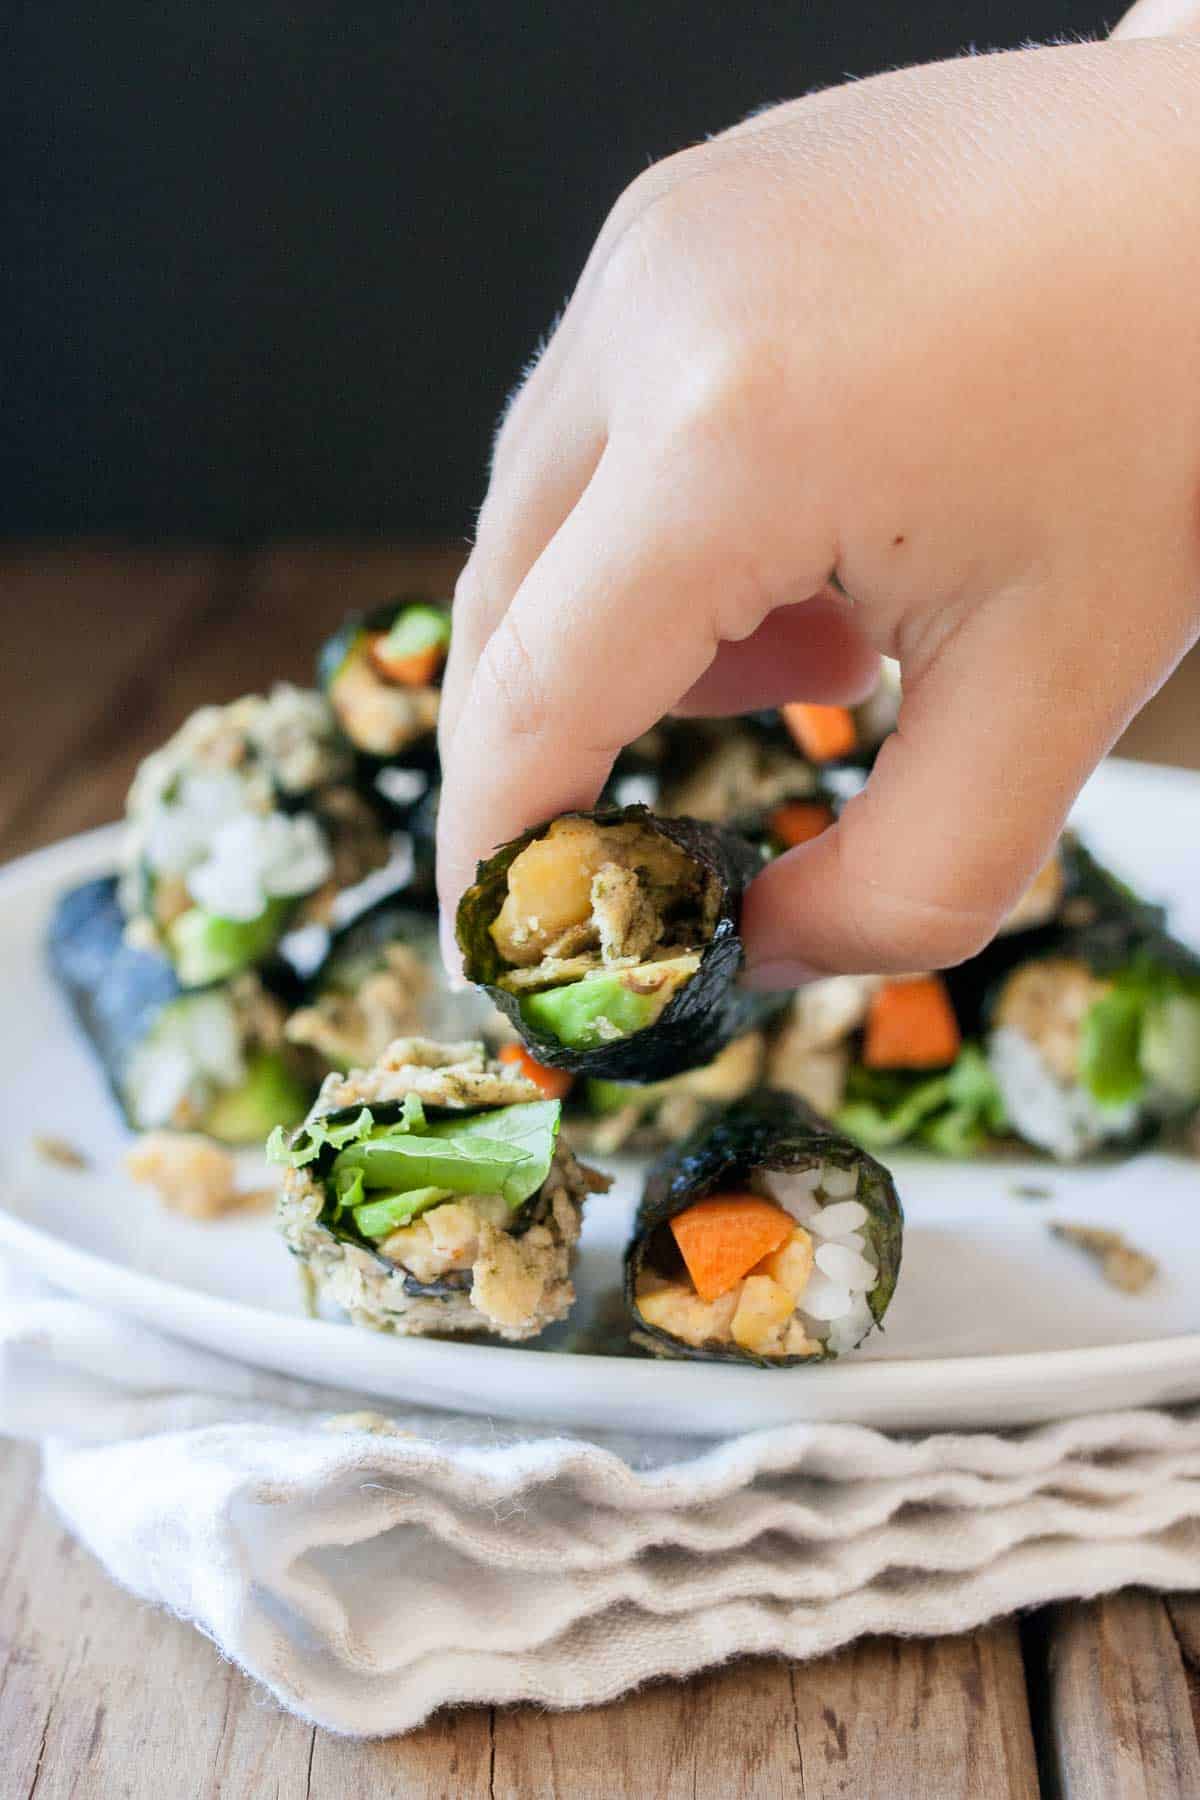 A child's hand grabbing a rolled sushi snack from a pile of them on a white plate.